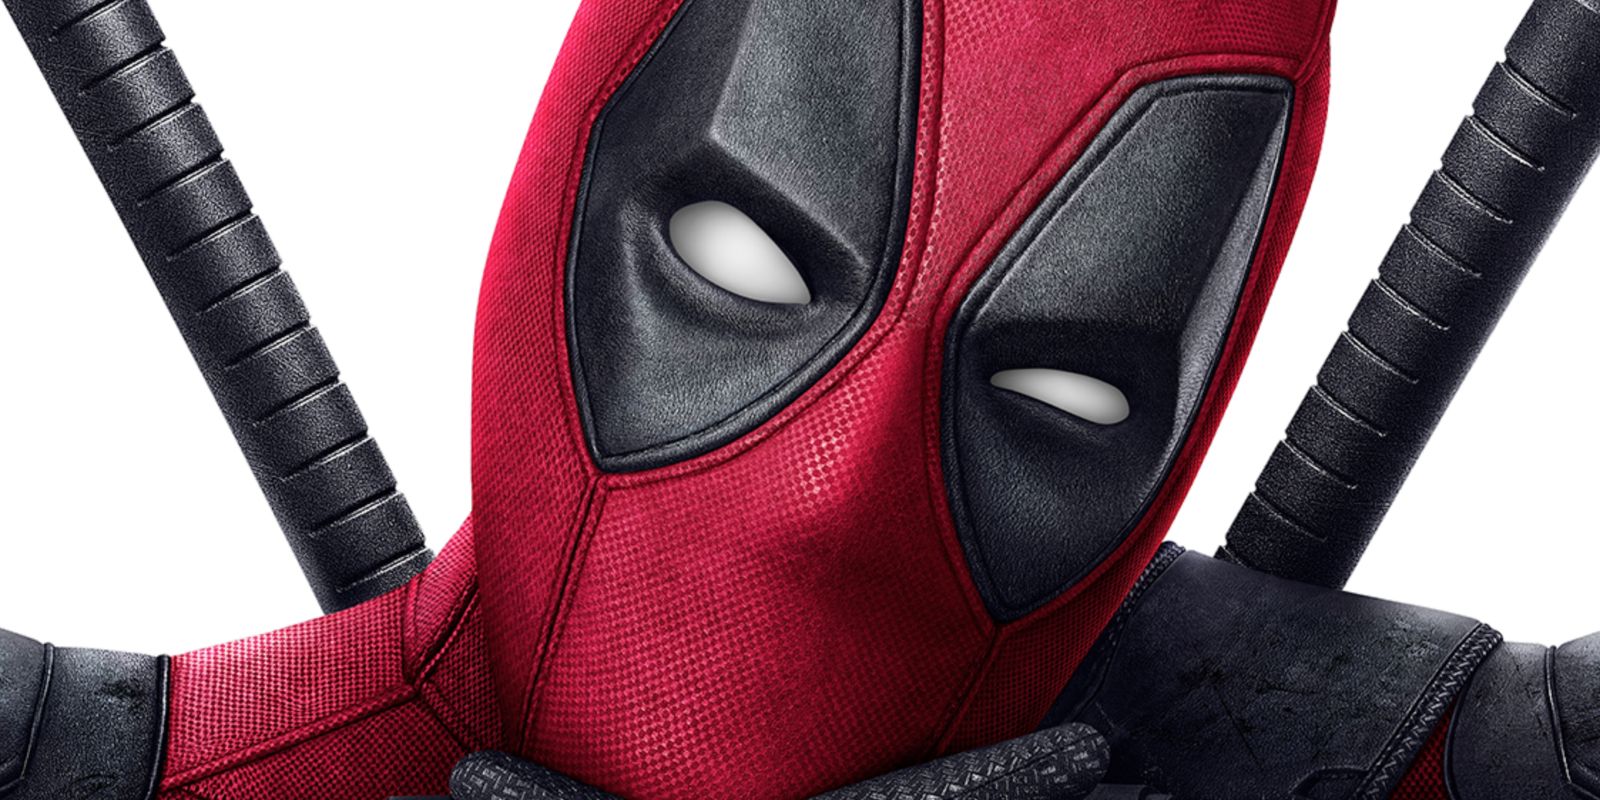 Ryan Reynolds paid for Deadpool writers to be on set